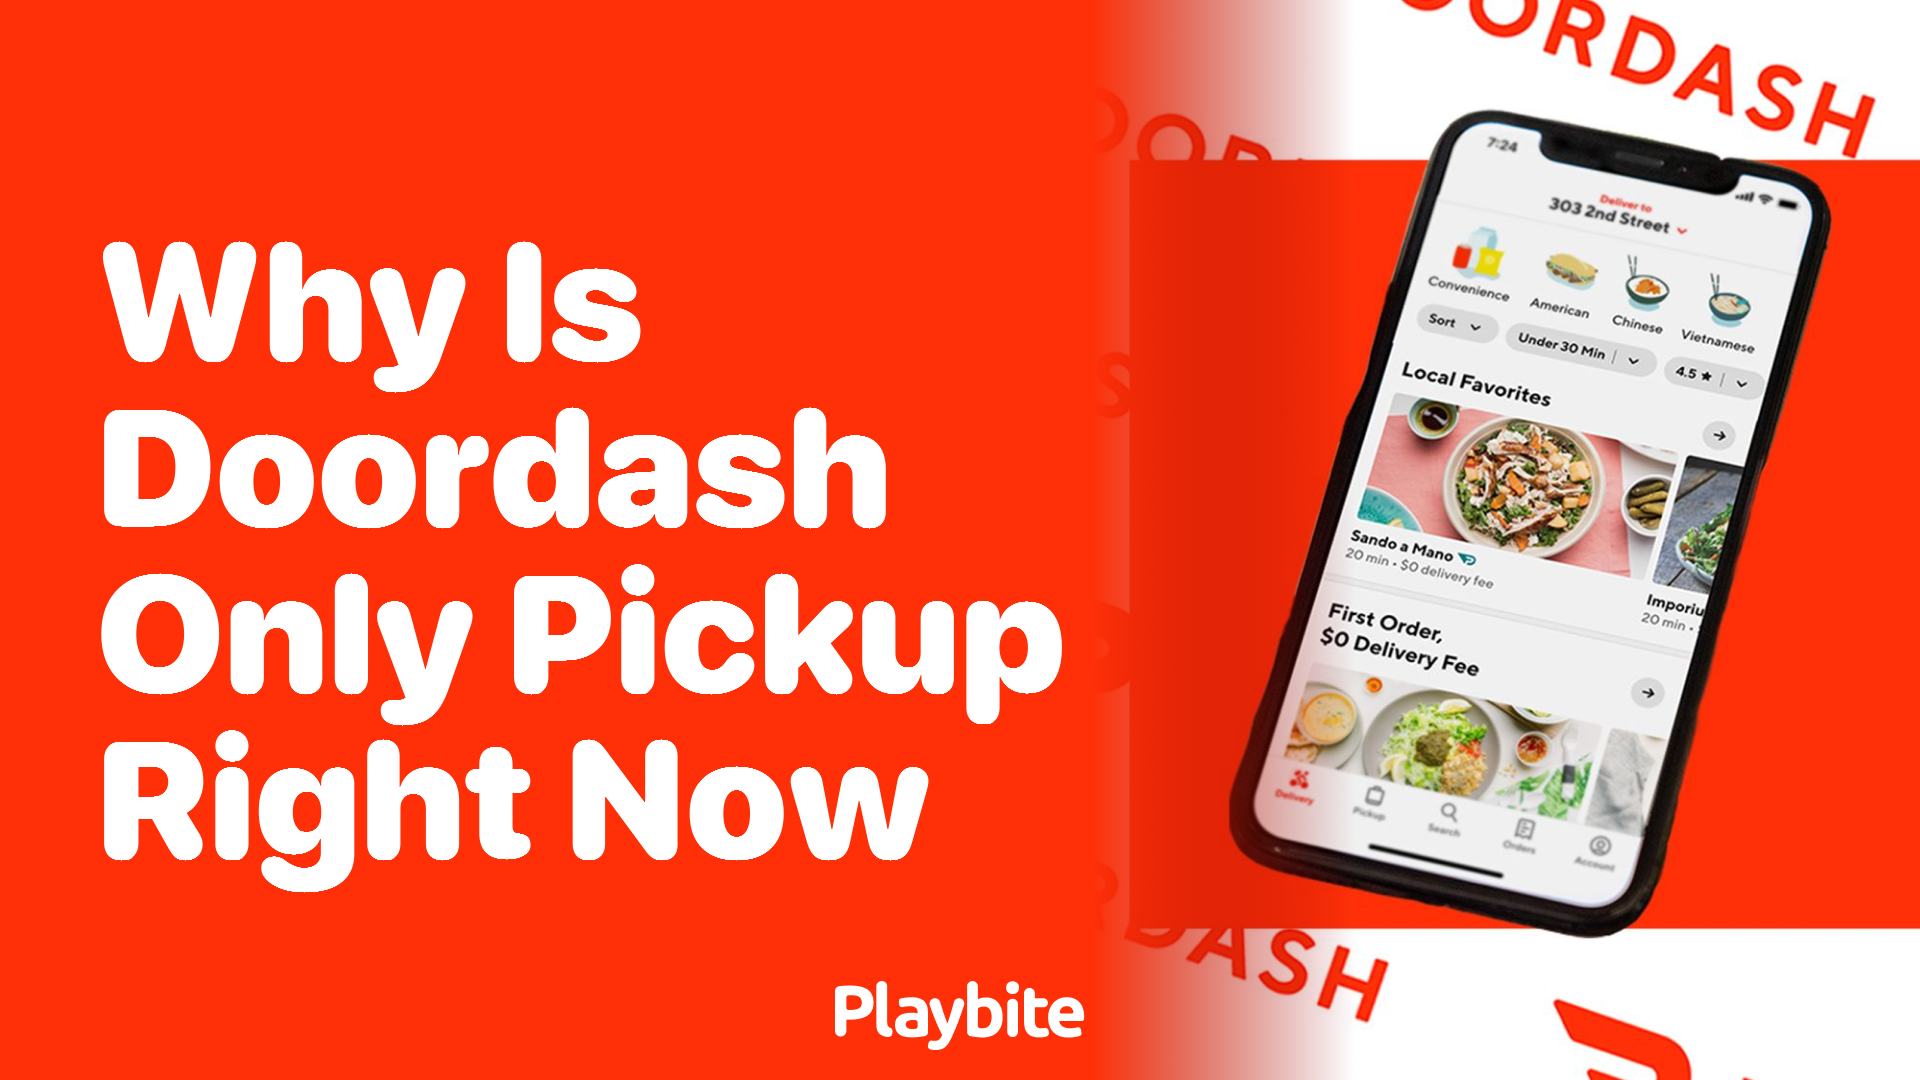 Why Is DoorDash Only Offering Pickup Right Now?